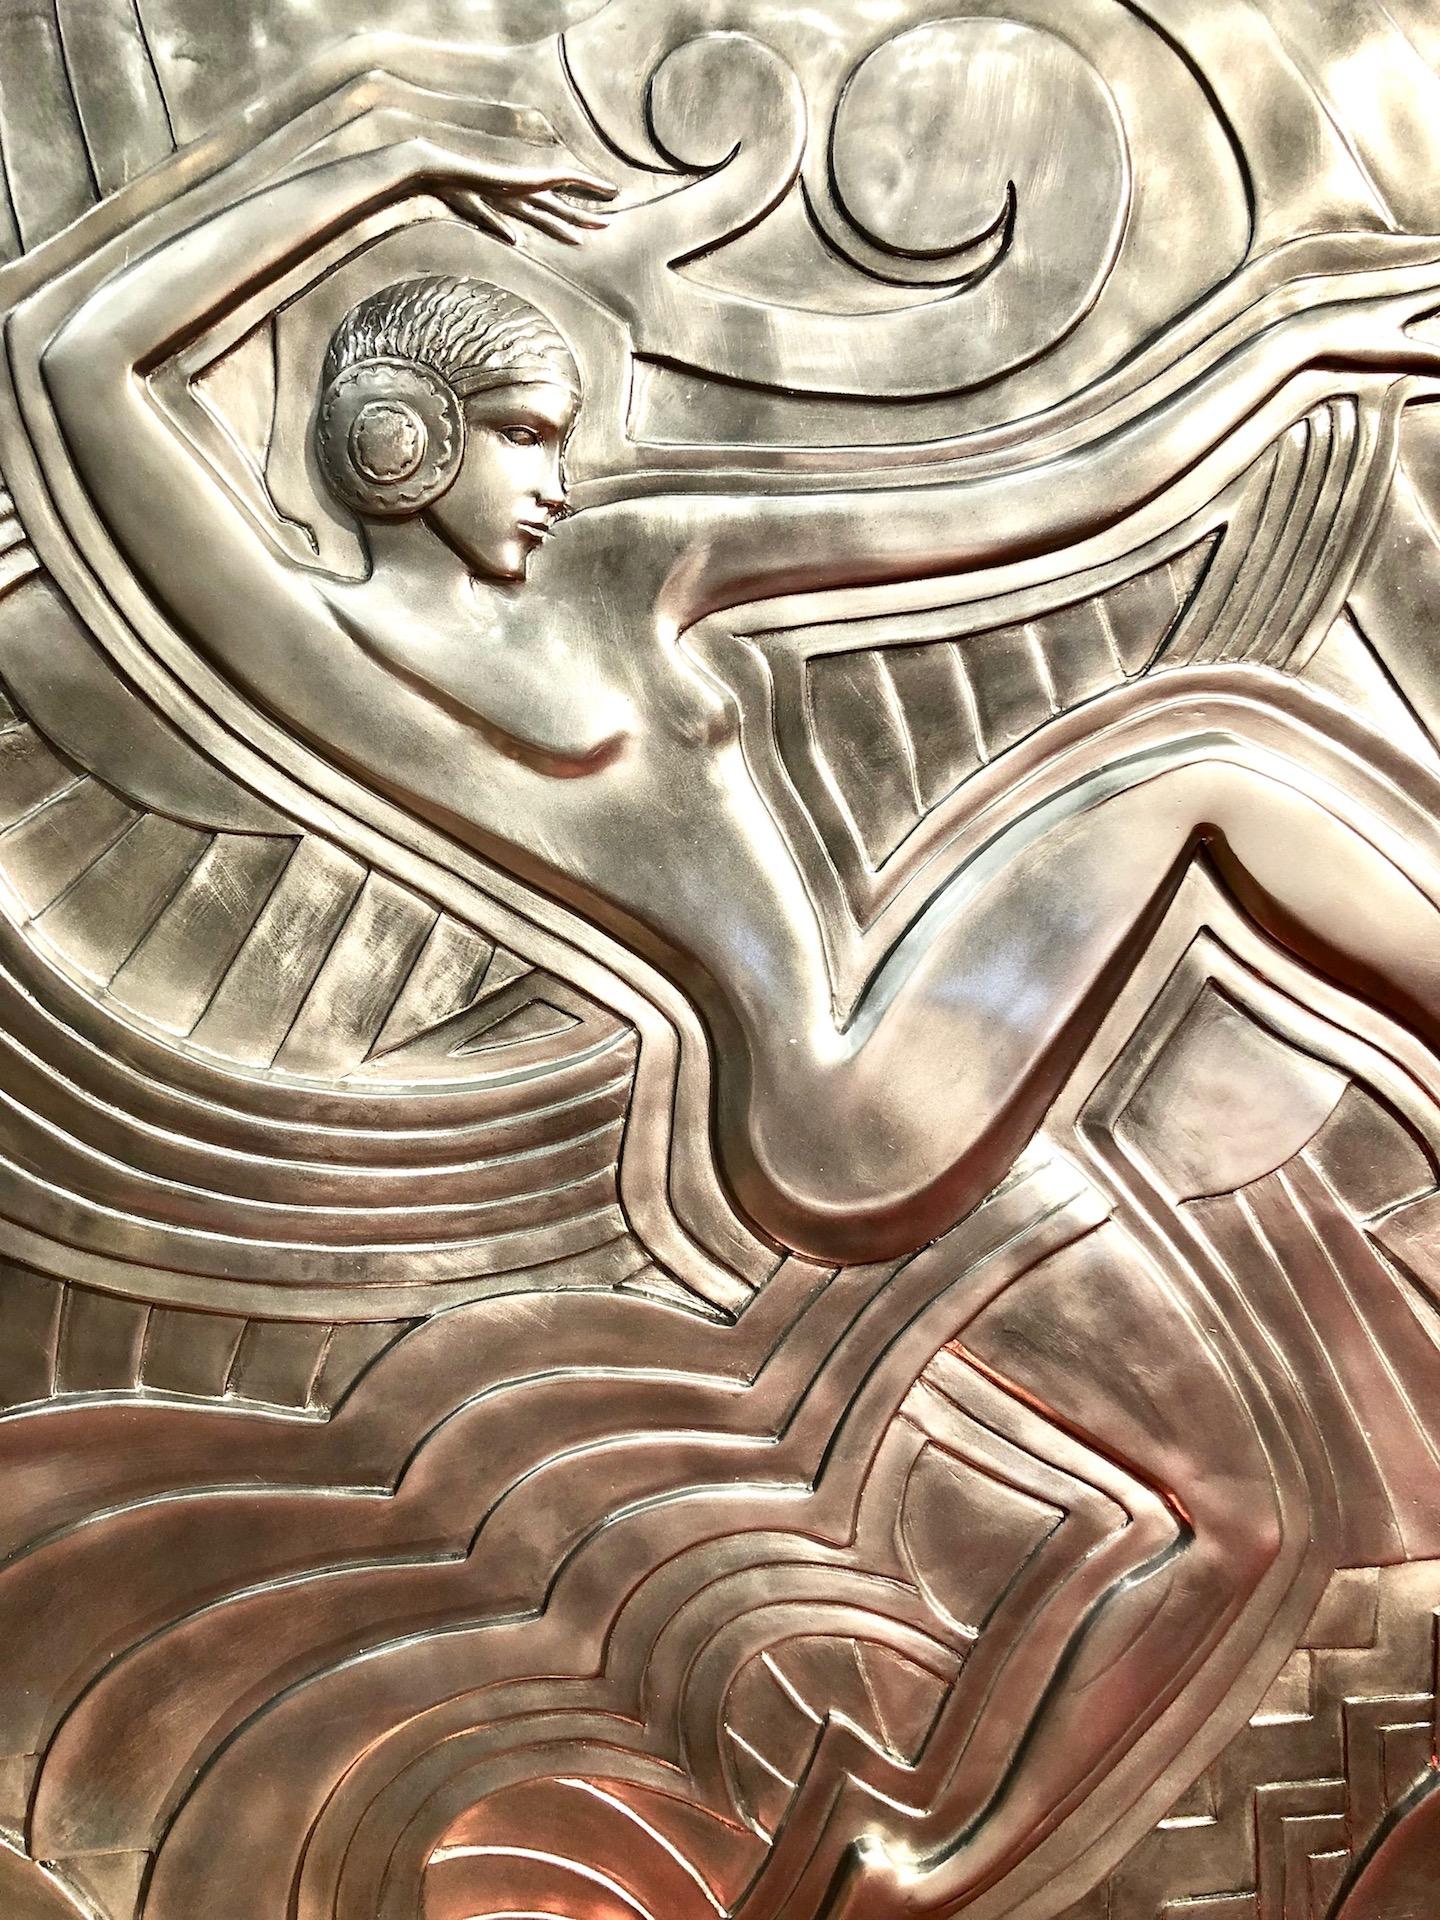 Silver wall plaque made after the model that decorates the facade of the revue theater “Folies Bergère” in Paris. This meter-high relief dates from 1926, by the French architect and designer “Maurice Picaud”, called “Pico”. The depicted dancer could